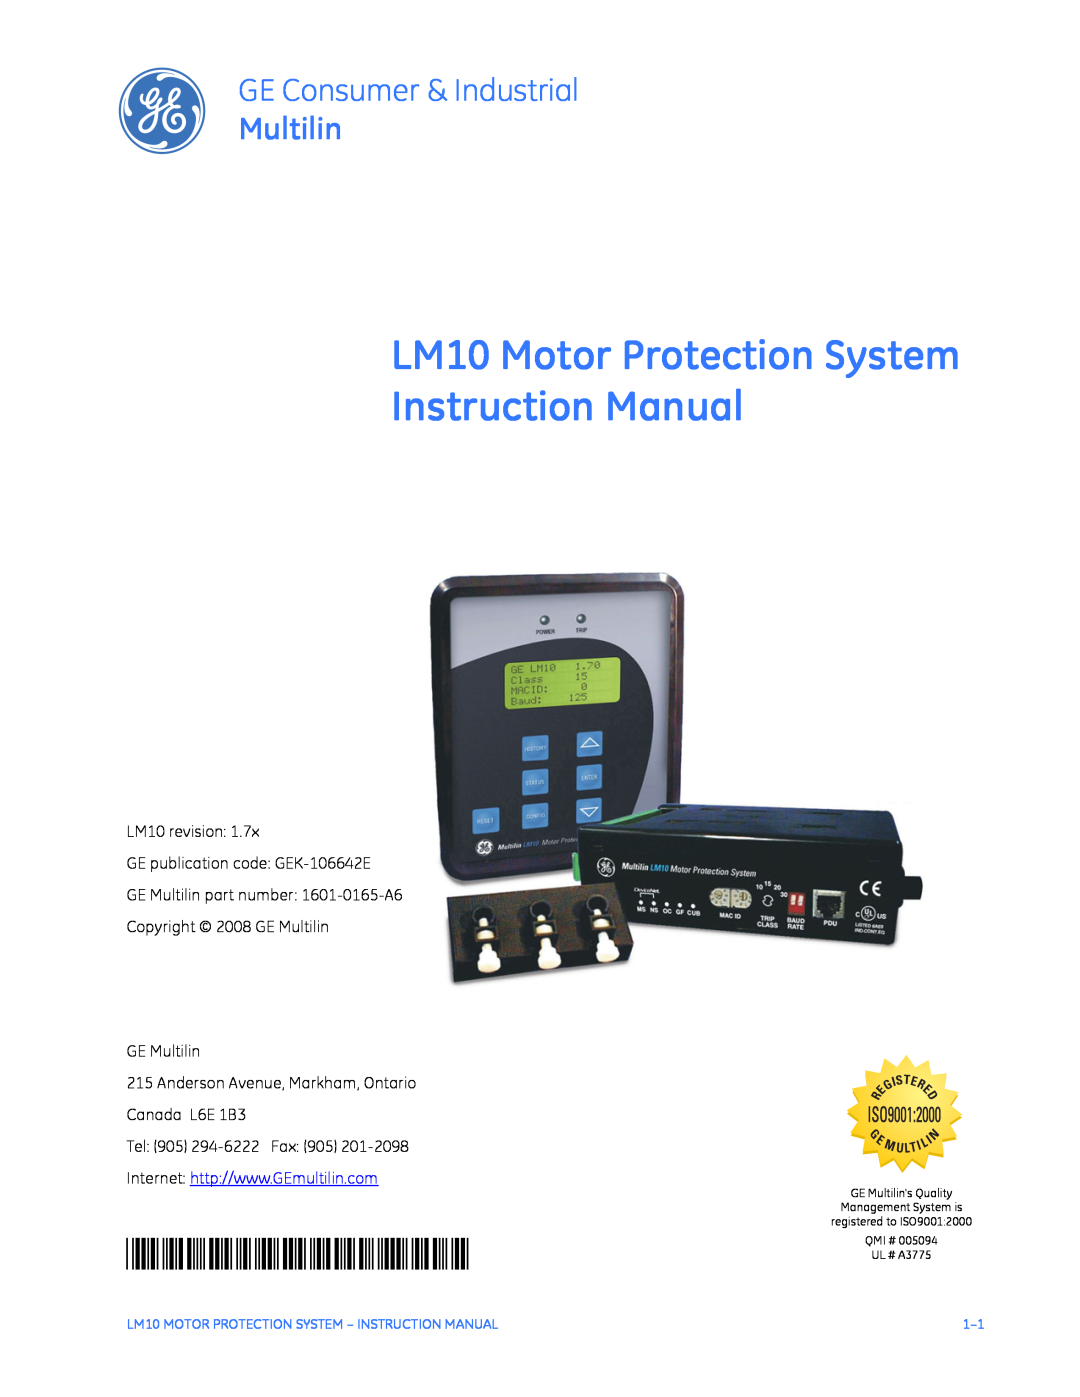 GE instruction manual LM10 Motor Protection System Instruction Manual, GE Consumer & Industrial, Multilin, 1601-0165-A6 